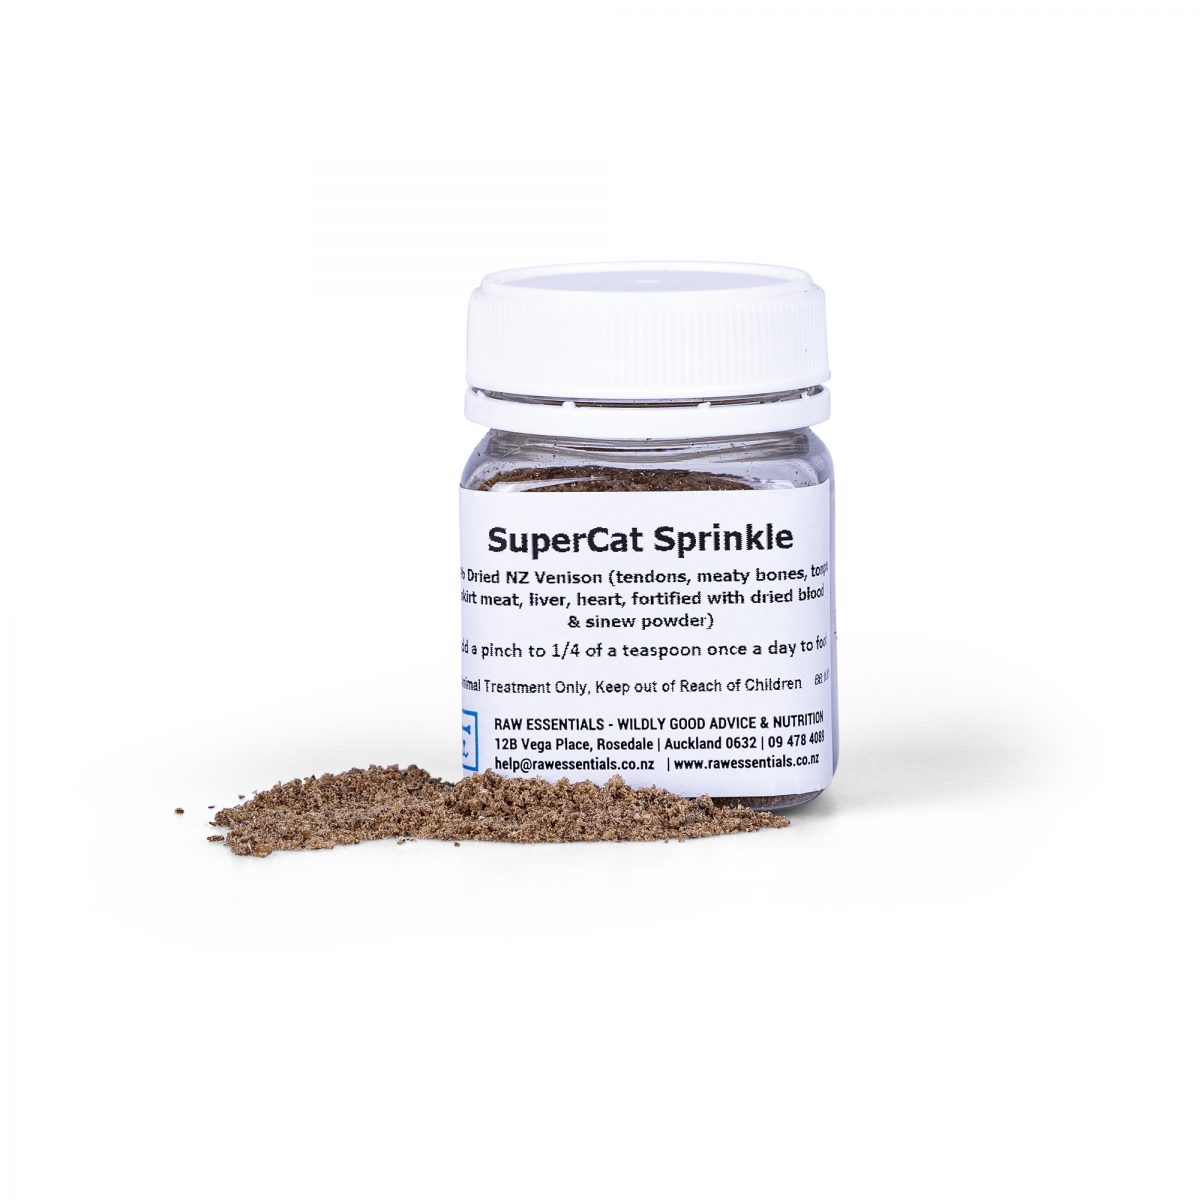 Plastic Container of SuperCat Sprinkles With Product Shown Outside Of The Bottle